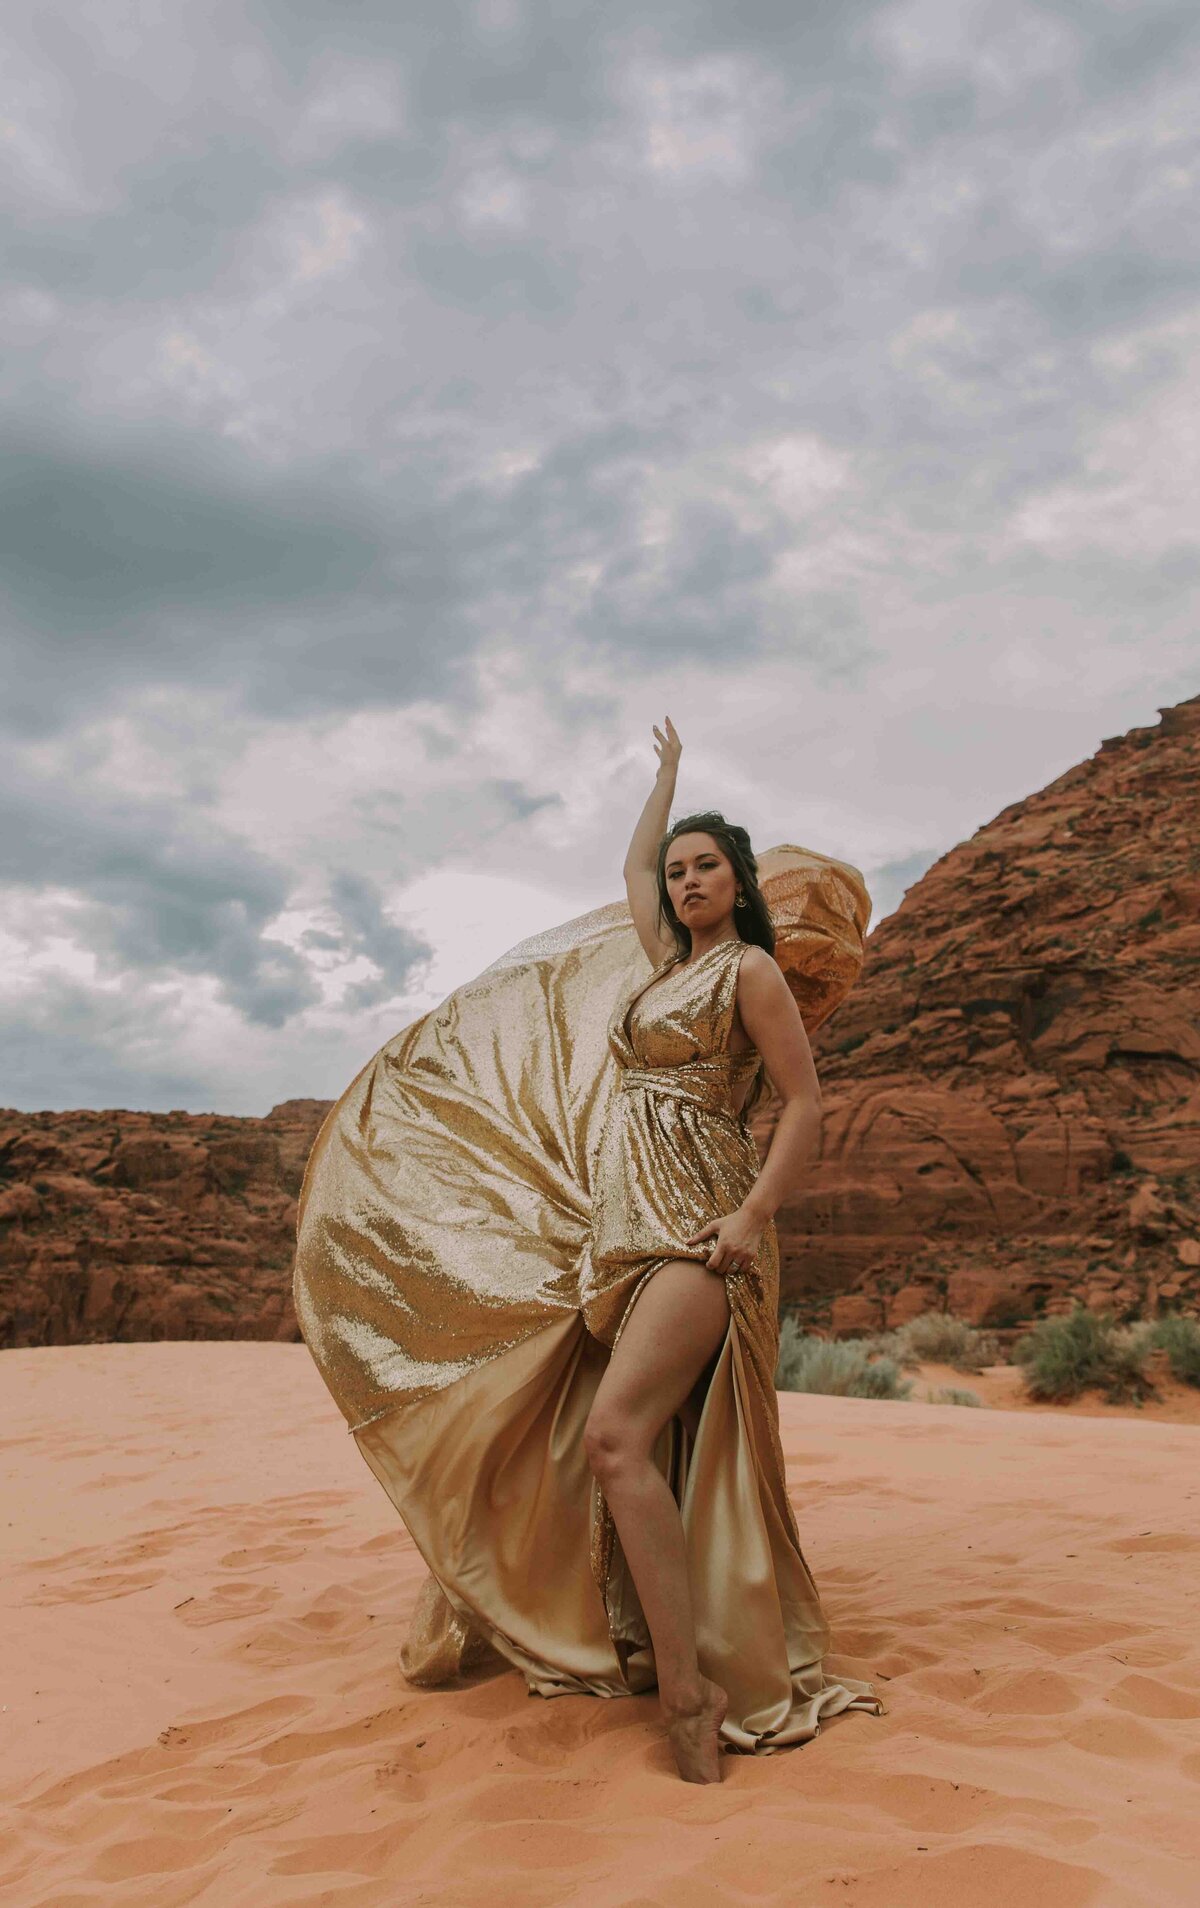 Woman in a gold dress at the sand dunes